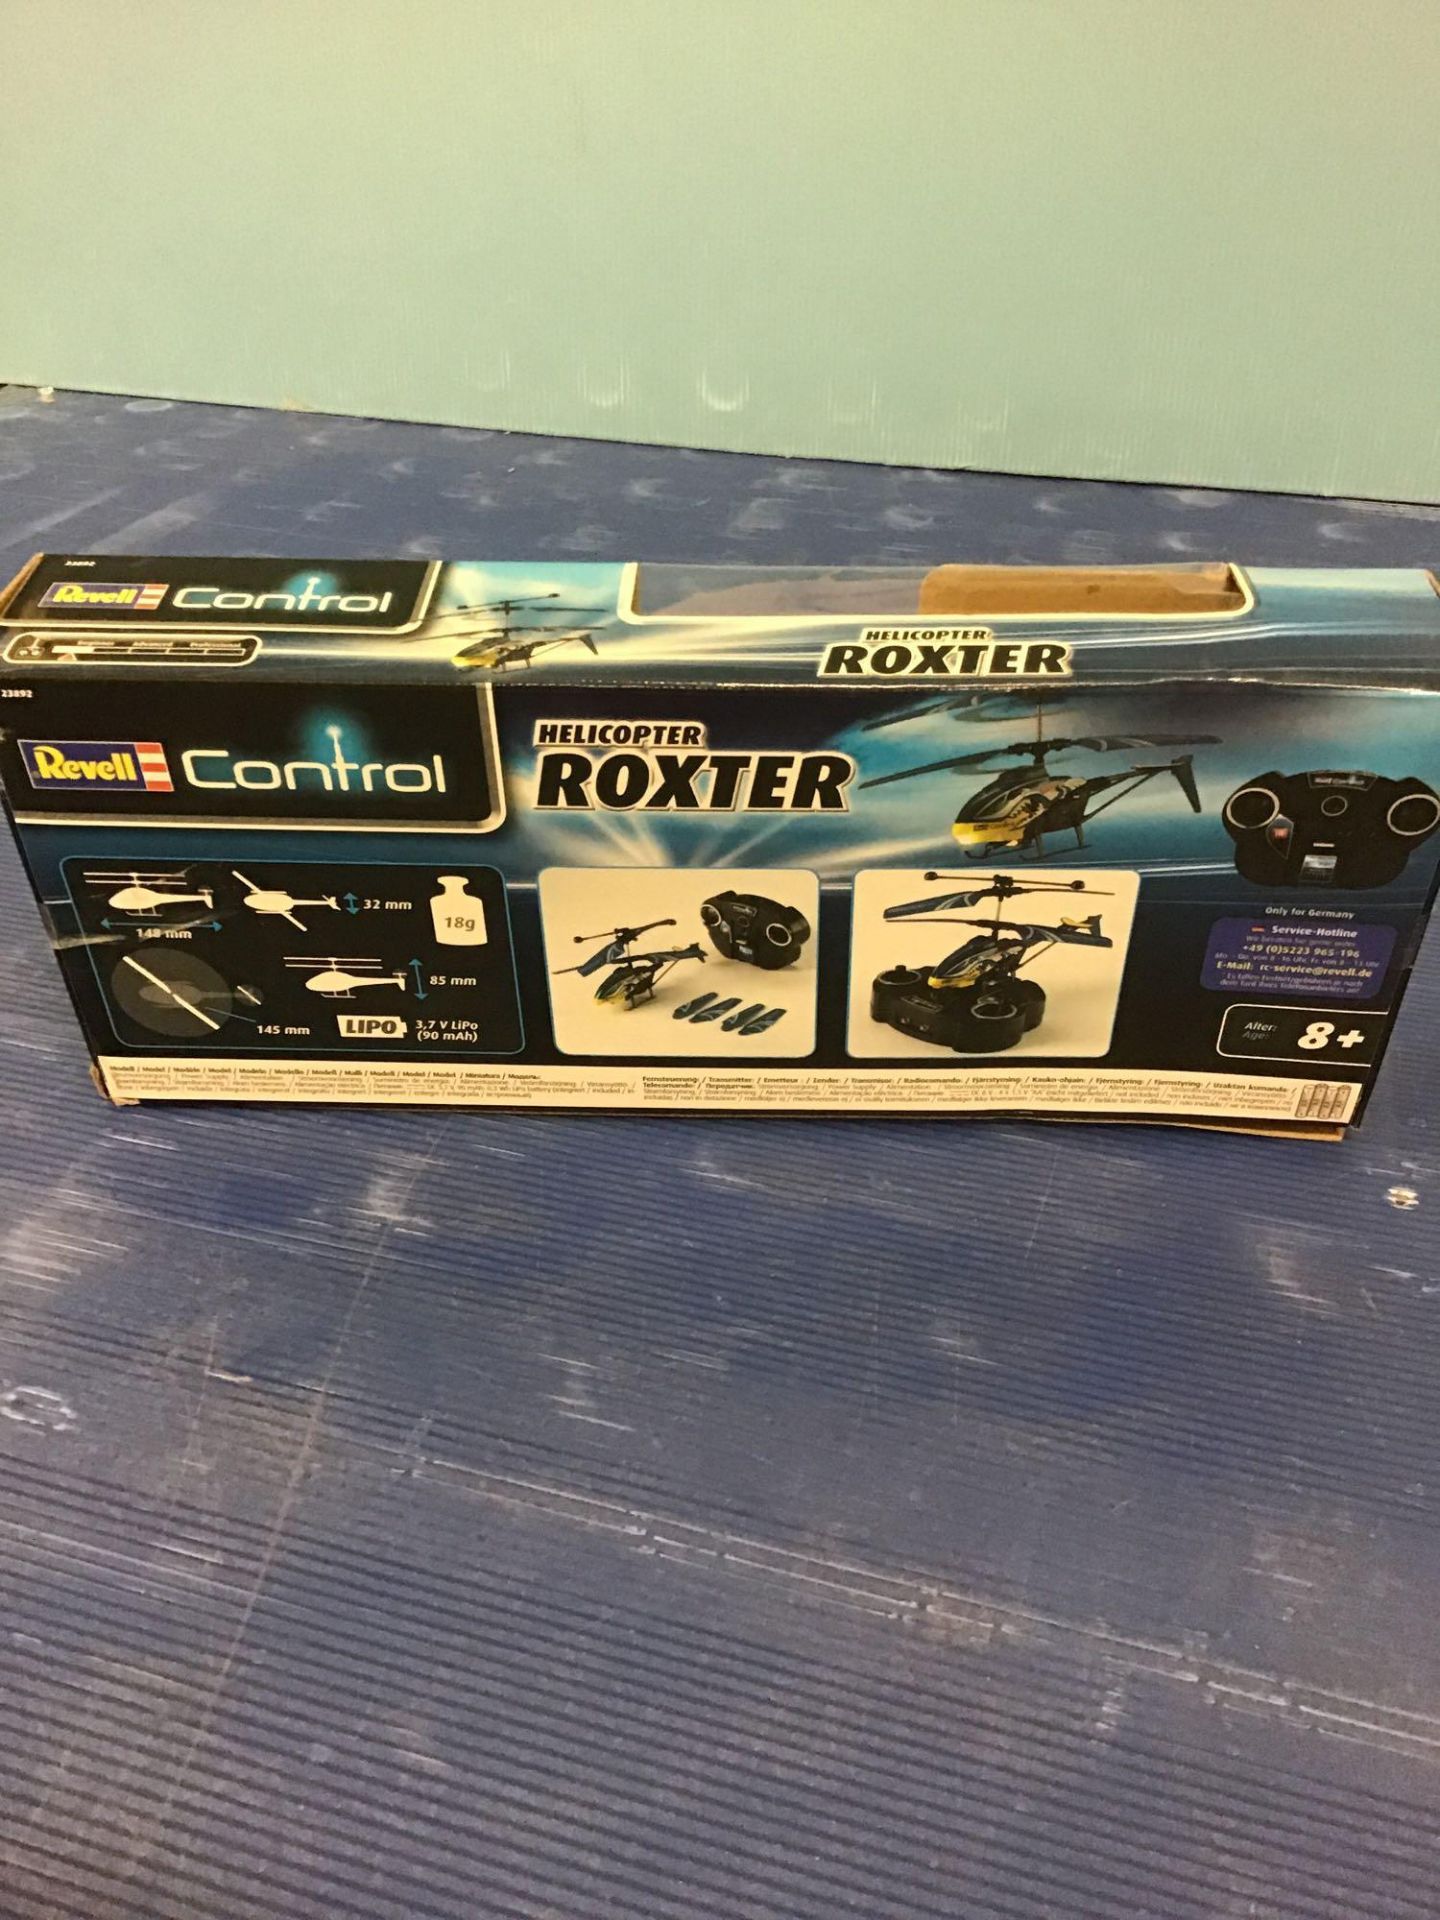 Revell Control RC Roxter Helicopter 711/6234 £13.00 RRP - Image 2 of 5